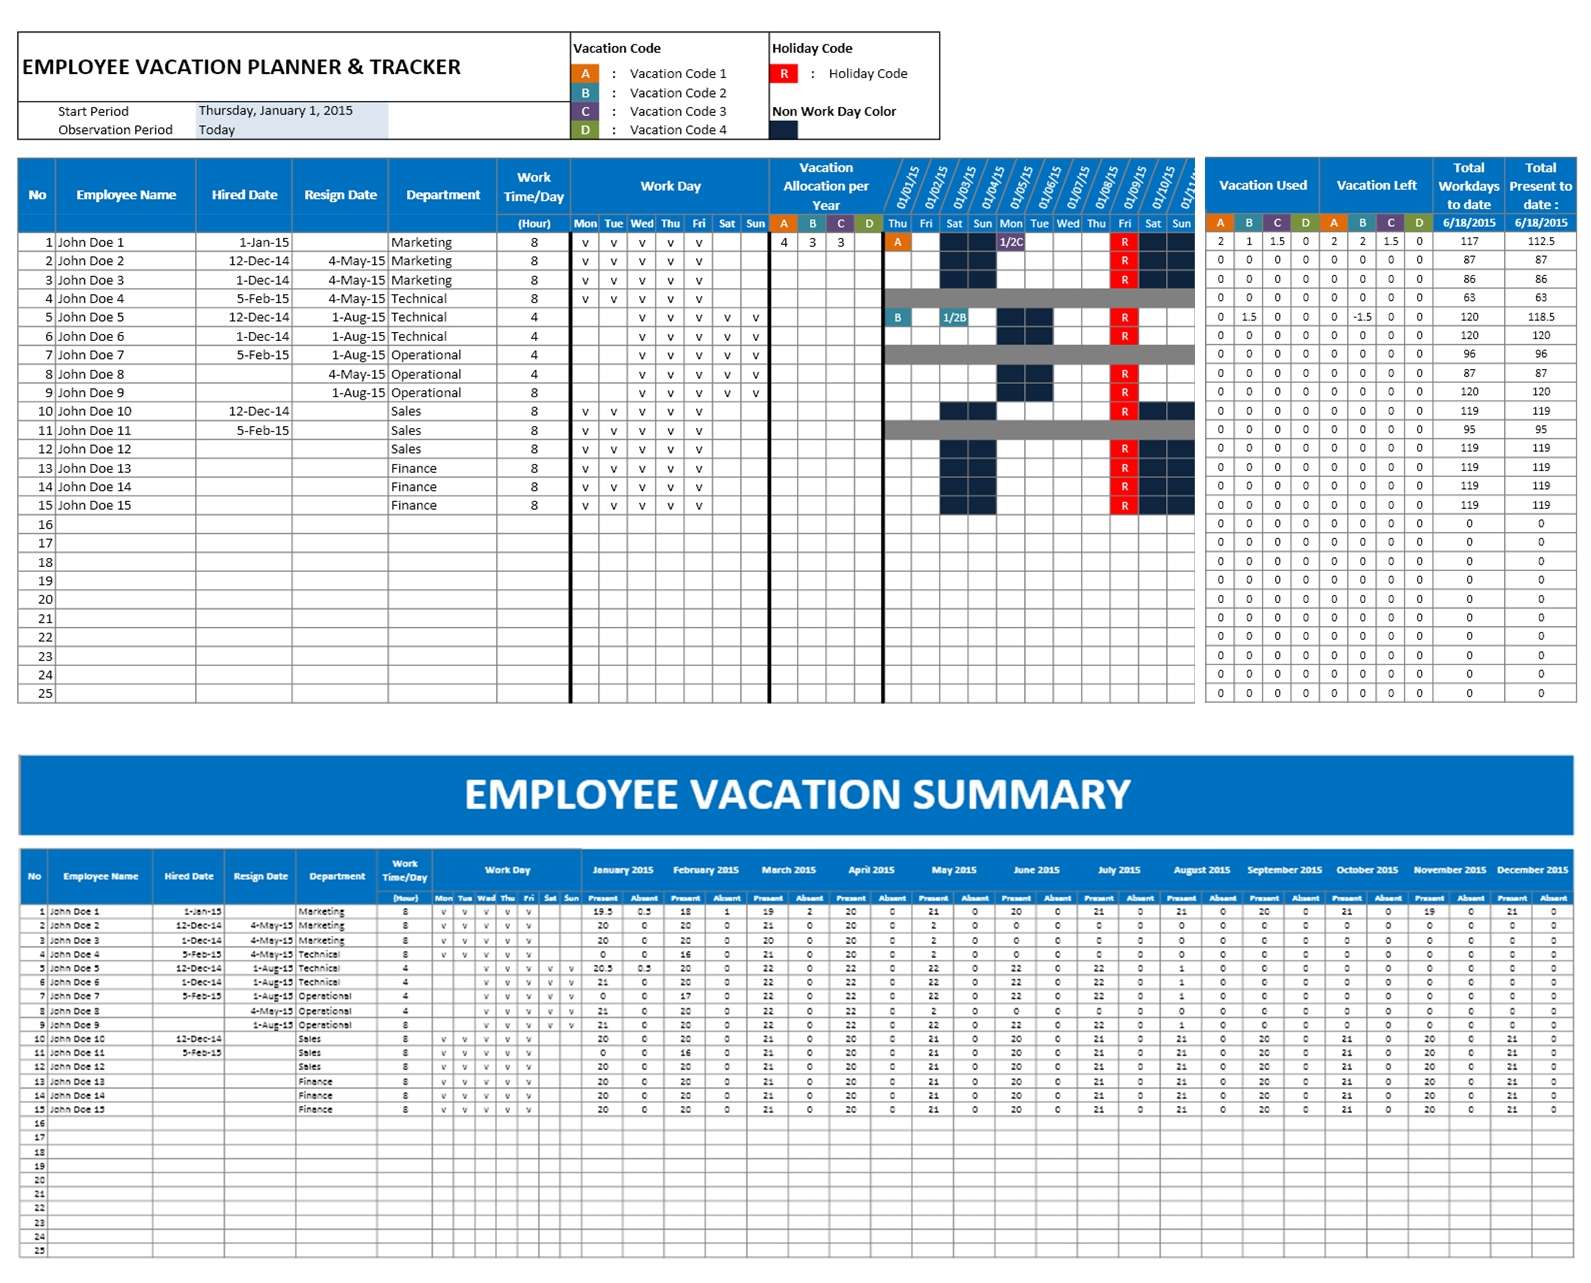 Employee Vacation Planner2.